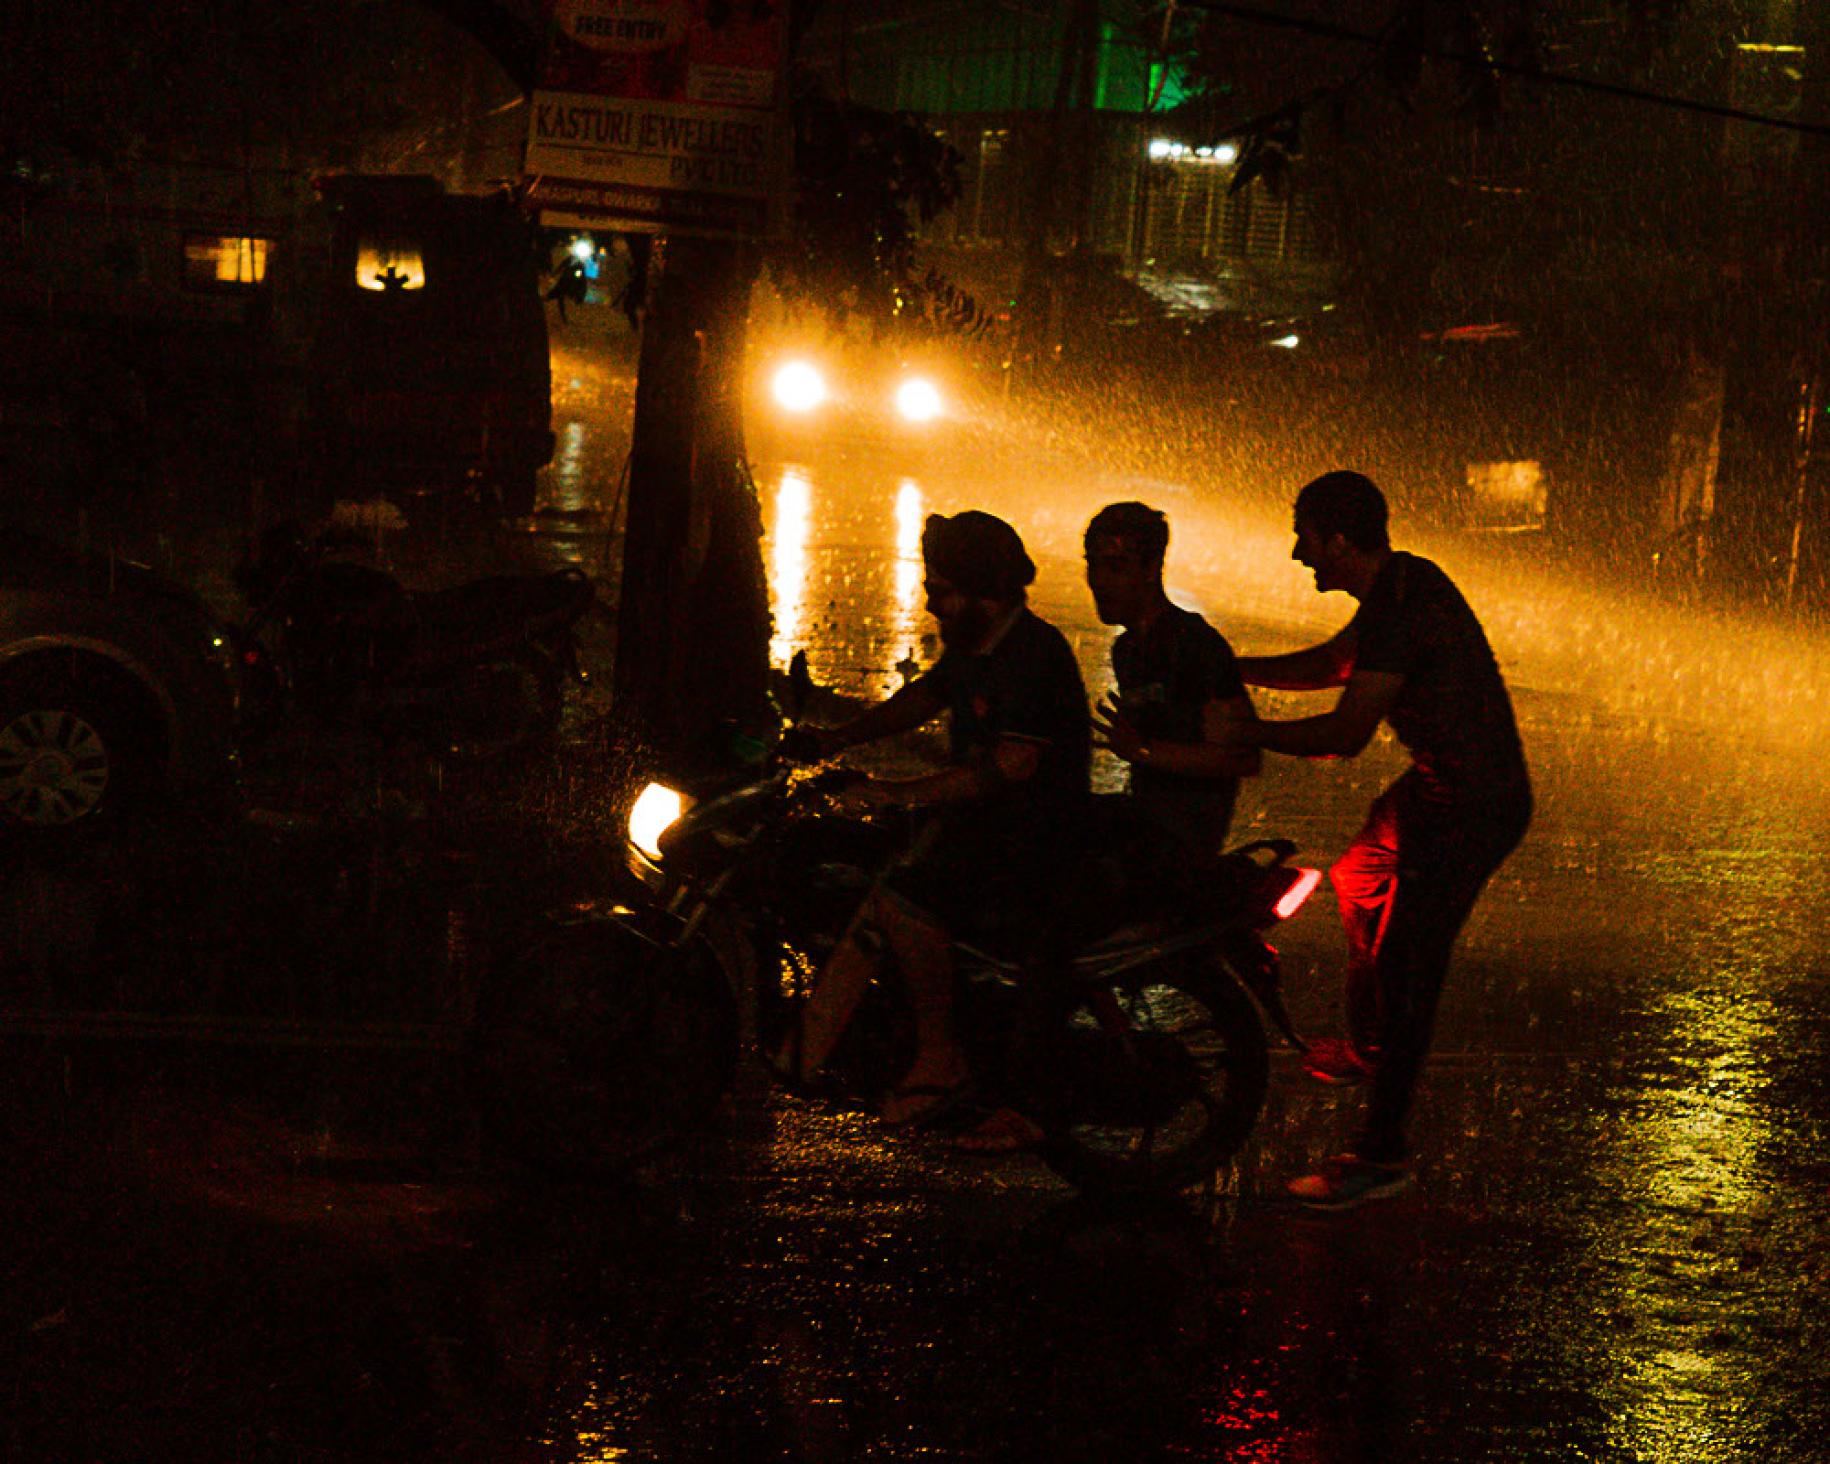 Three people laughing in the rain on the street at night. 